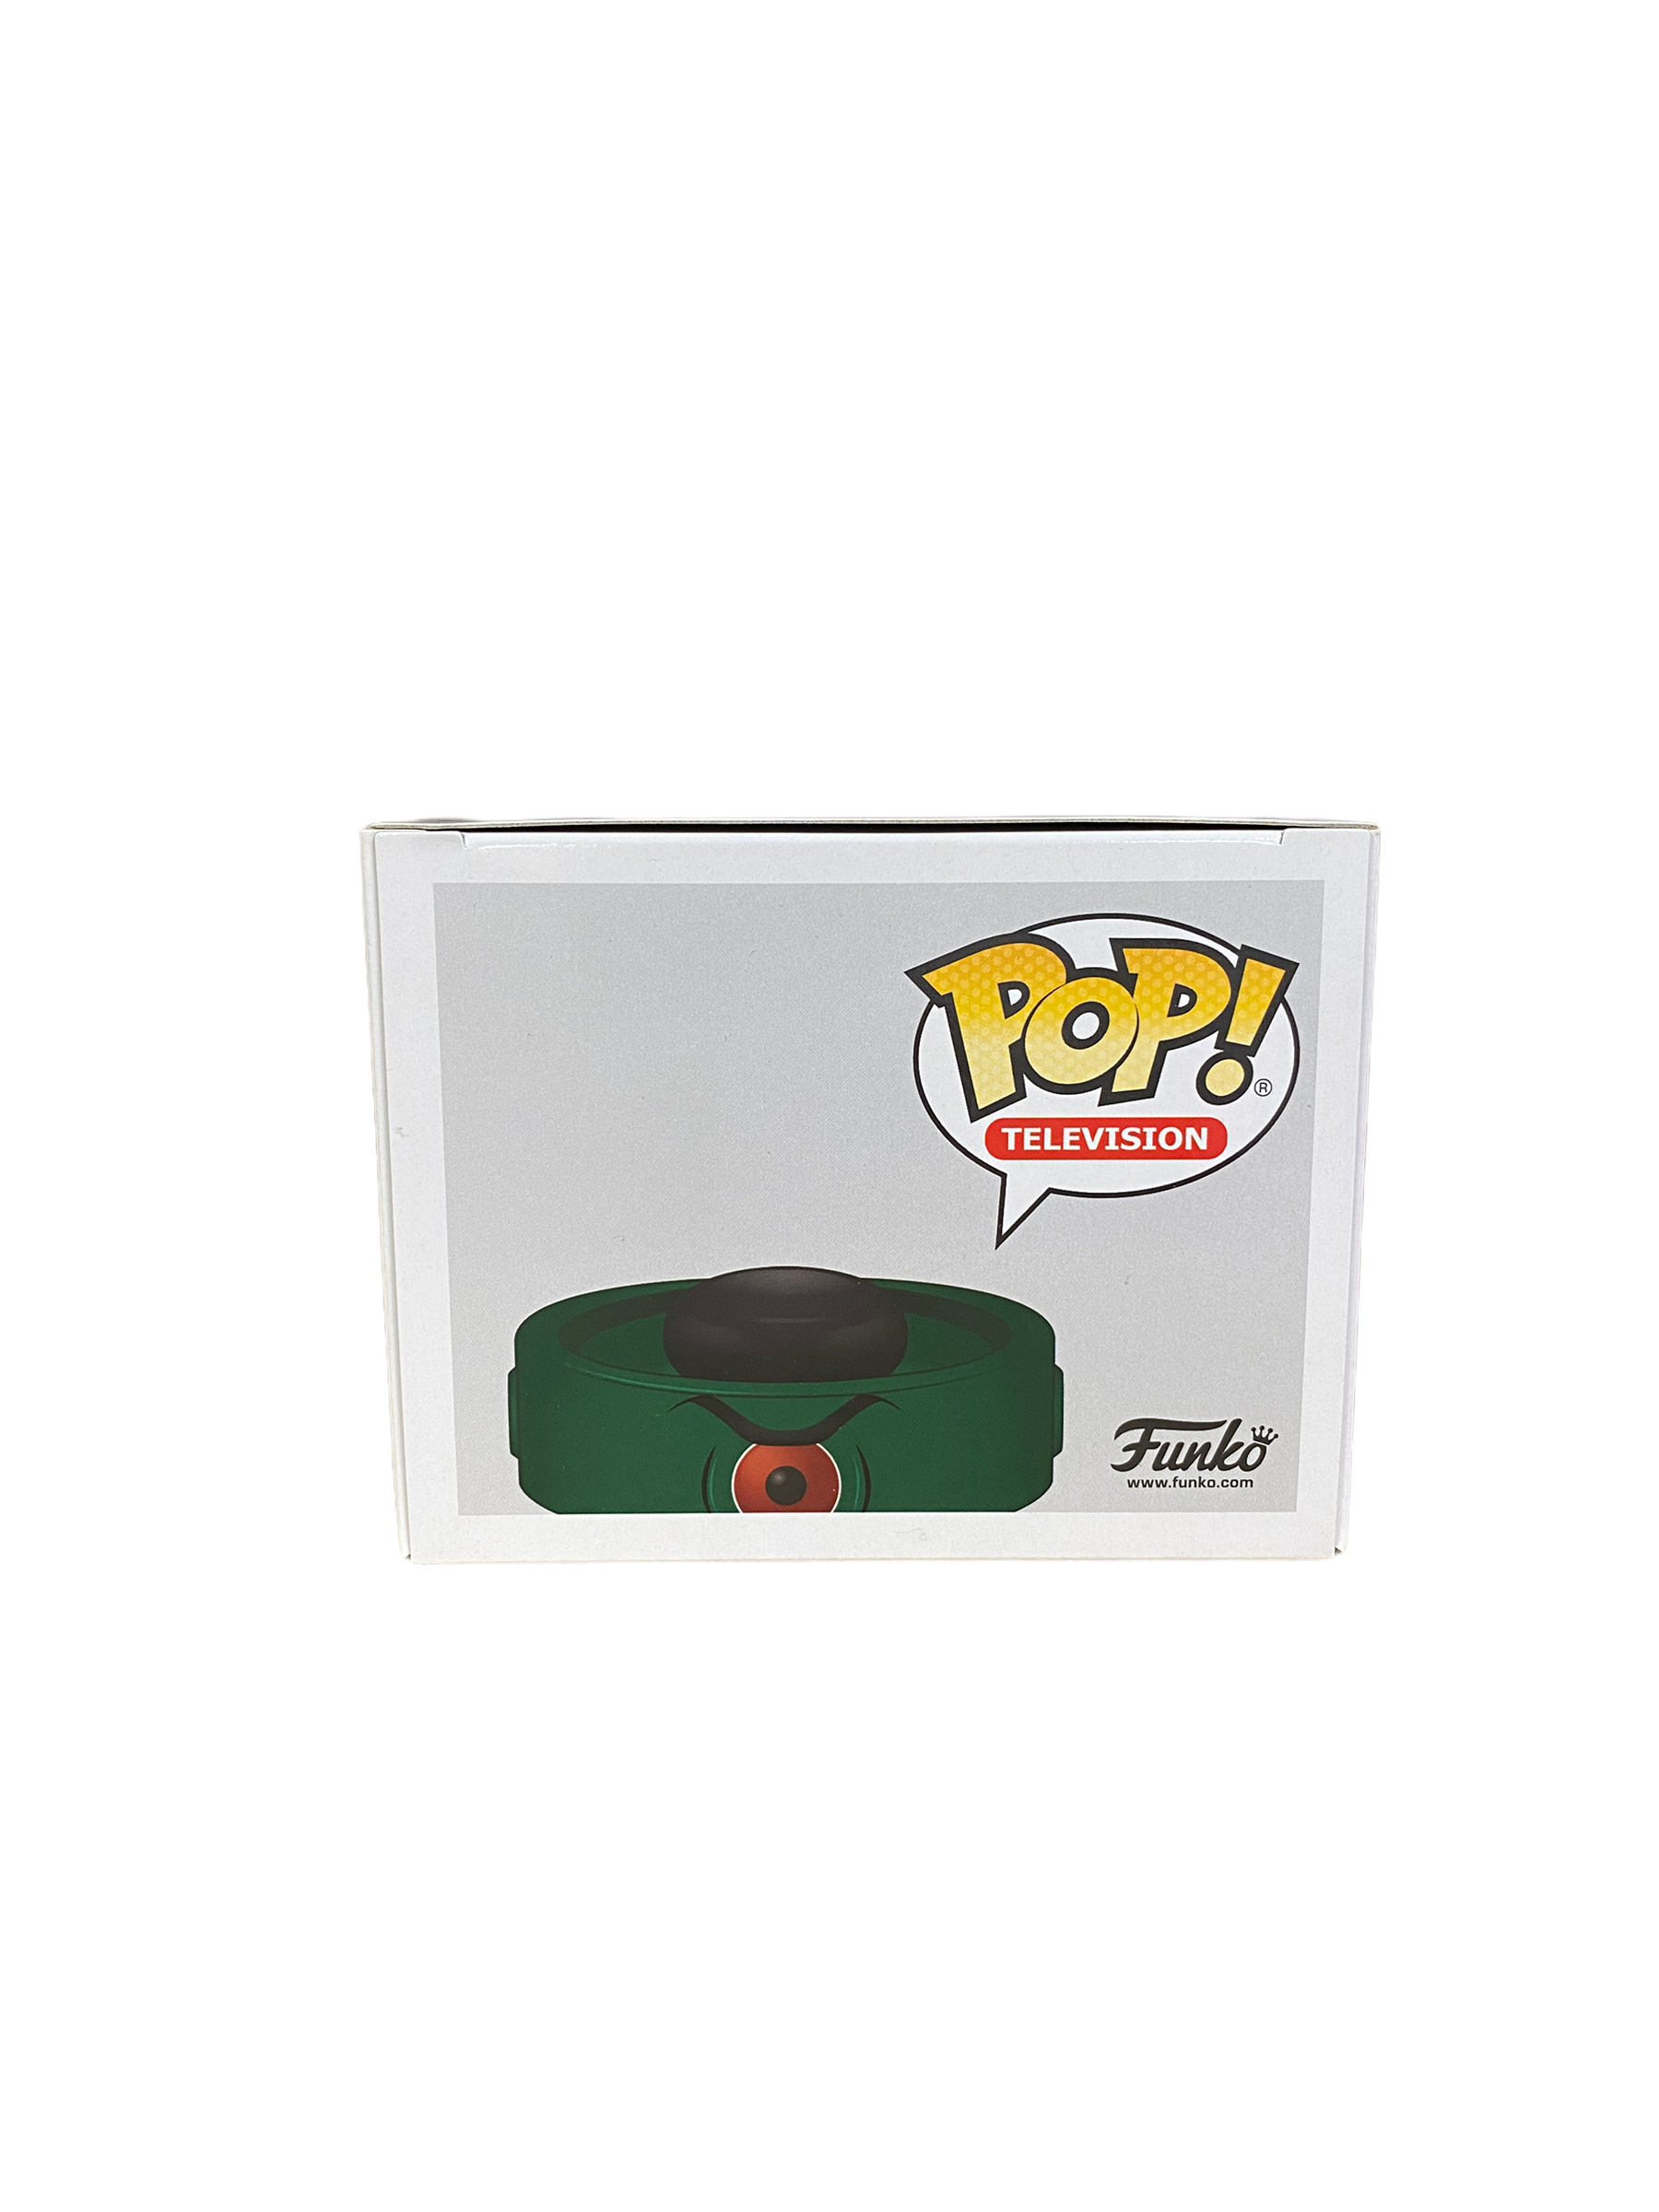 Tri-Klops #951 Funko Pop! - Masters Of The Universe - ECCC 2020 Official Convention Exclusive - Condition 9.5+/10